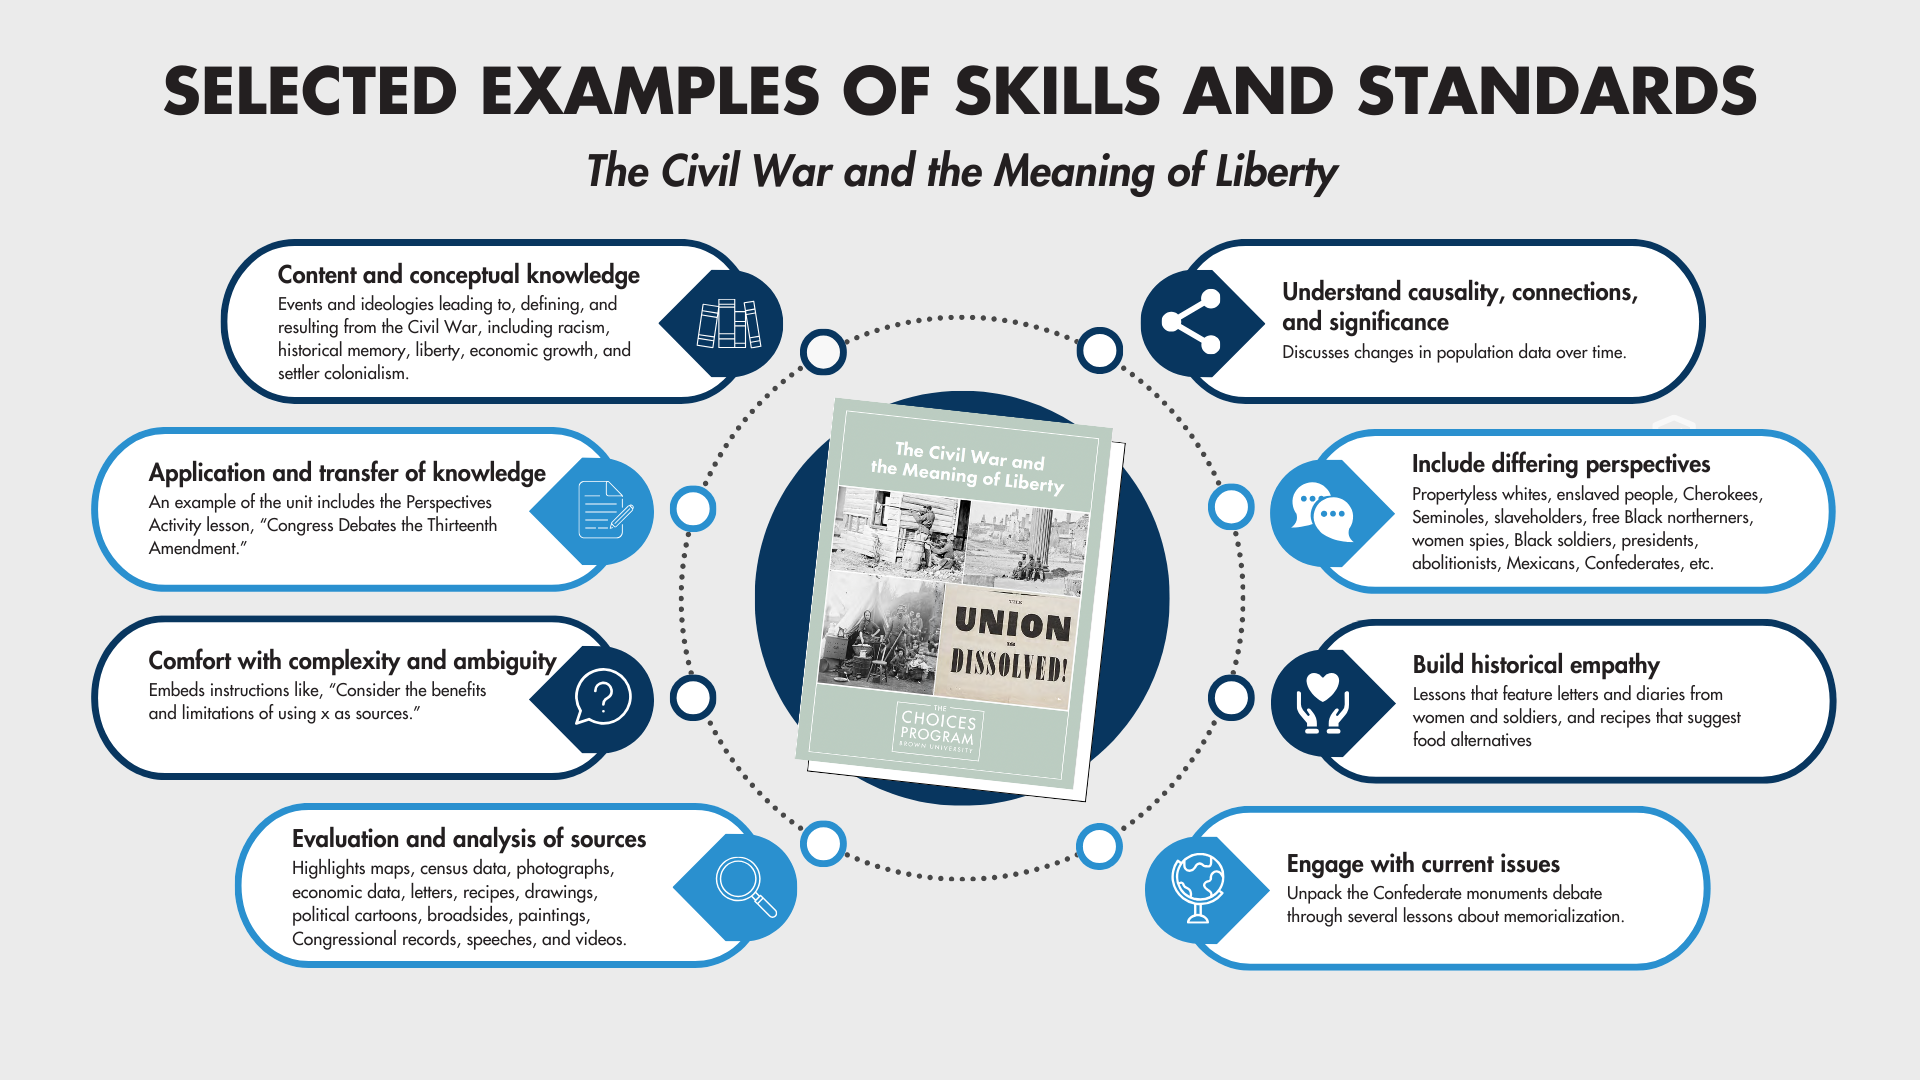 Infographic that highlights some of the skills and standards in the Choices "The Civil War and the Meaning of Liberty" curriculum unit. Skills include content and conceptual knowledge, comfort with complexity and ambiguity, evaluation and analysis of sources, historical empathy, current issues, and more. 